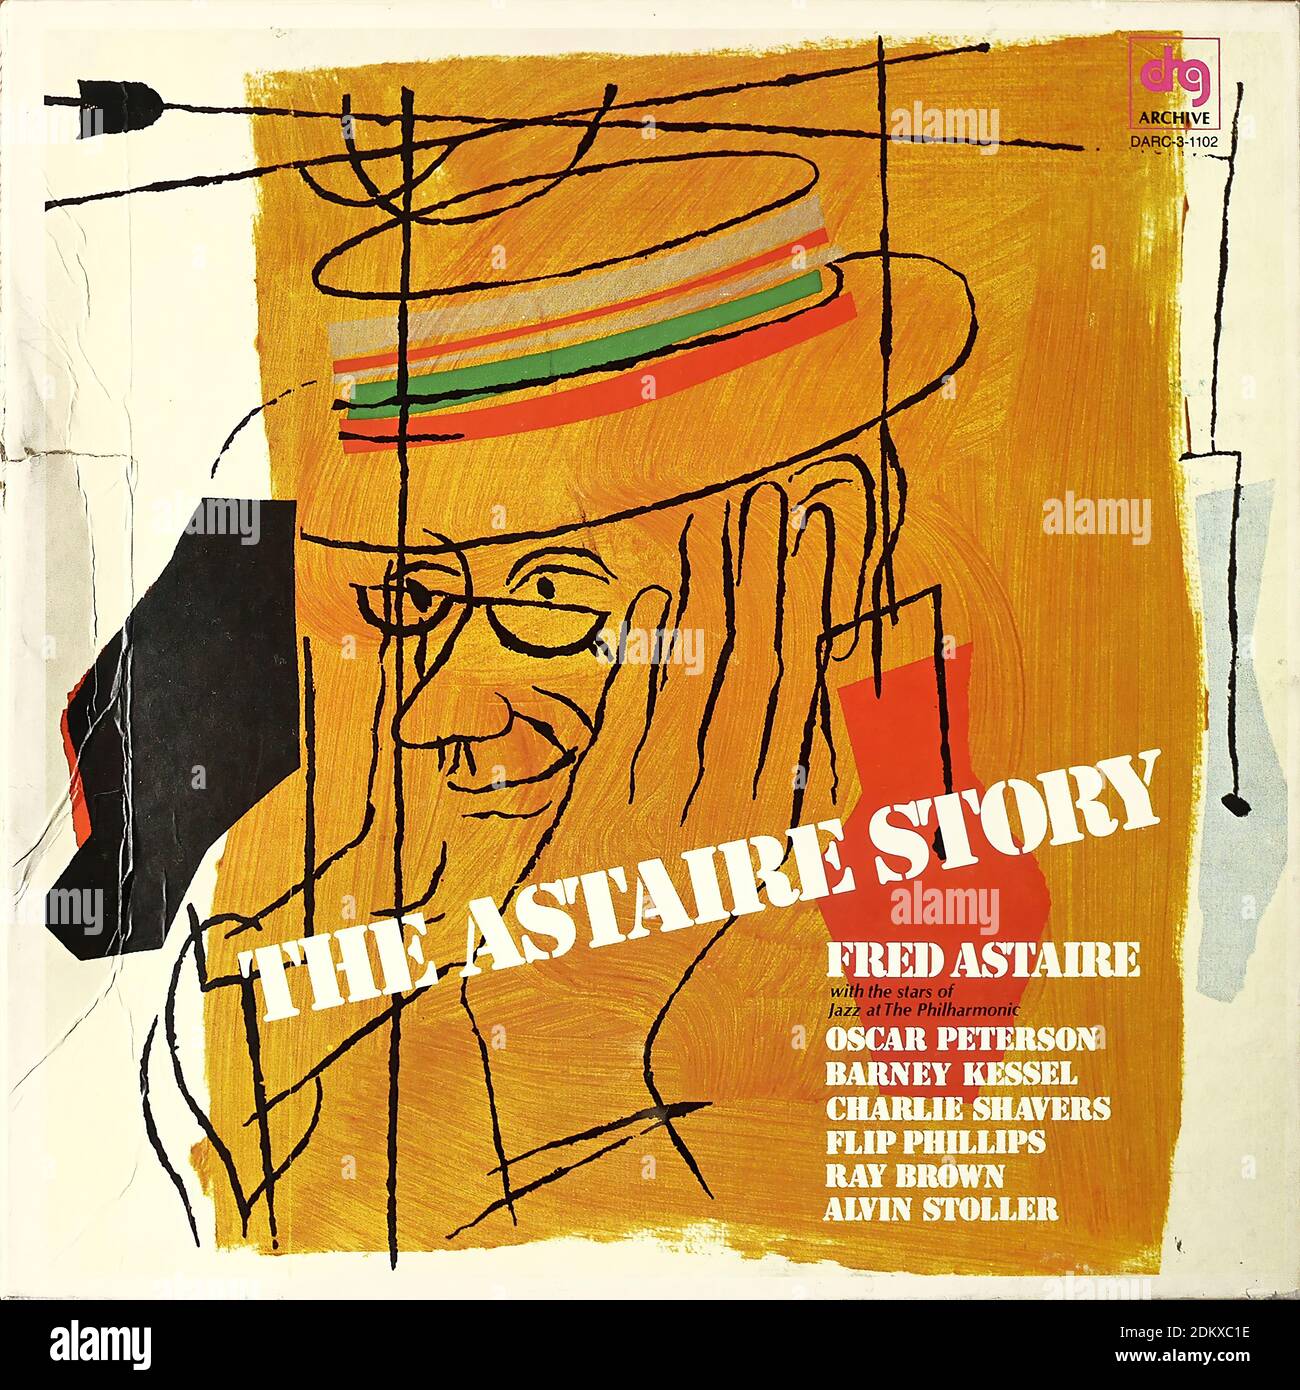 The Astaire Story - Fred Astaire, Oscar Peterson, Barney Kessel, Charlie Shavers, Flip Phillips, Ray Brown, Alvin Stoller, DRG Archive DARC-3-1102, 1952 1953 1978, Box 3 Lp  - Vintage vinyl album cover Stock Photo